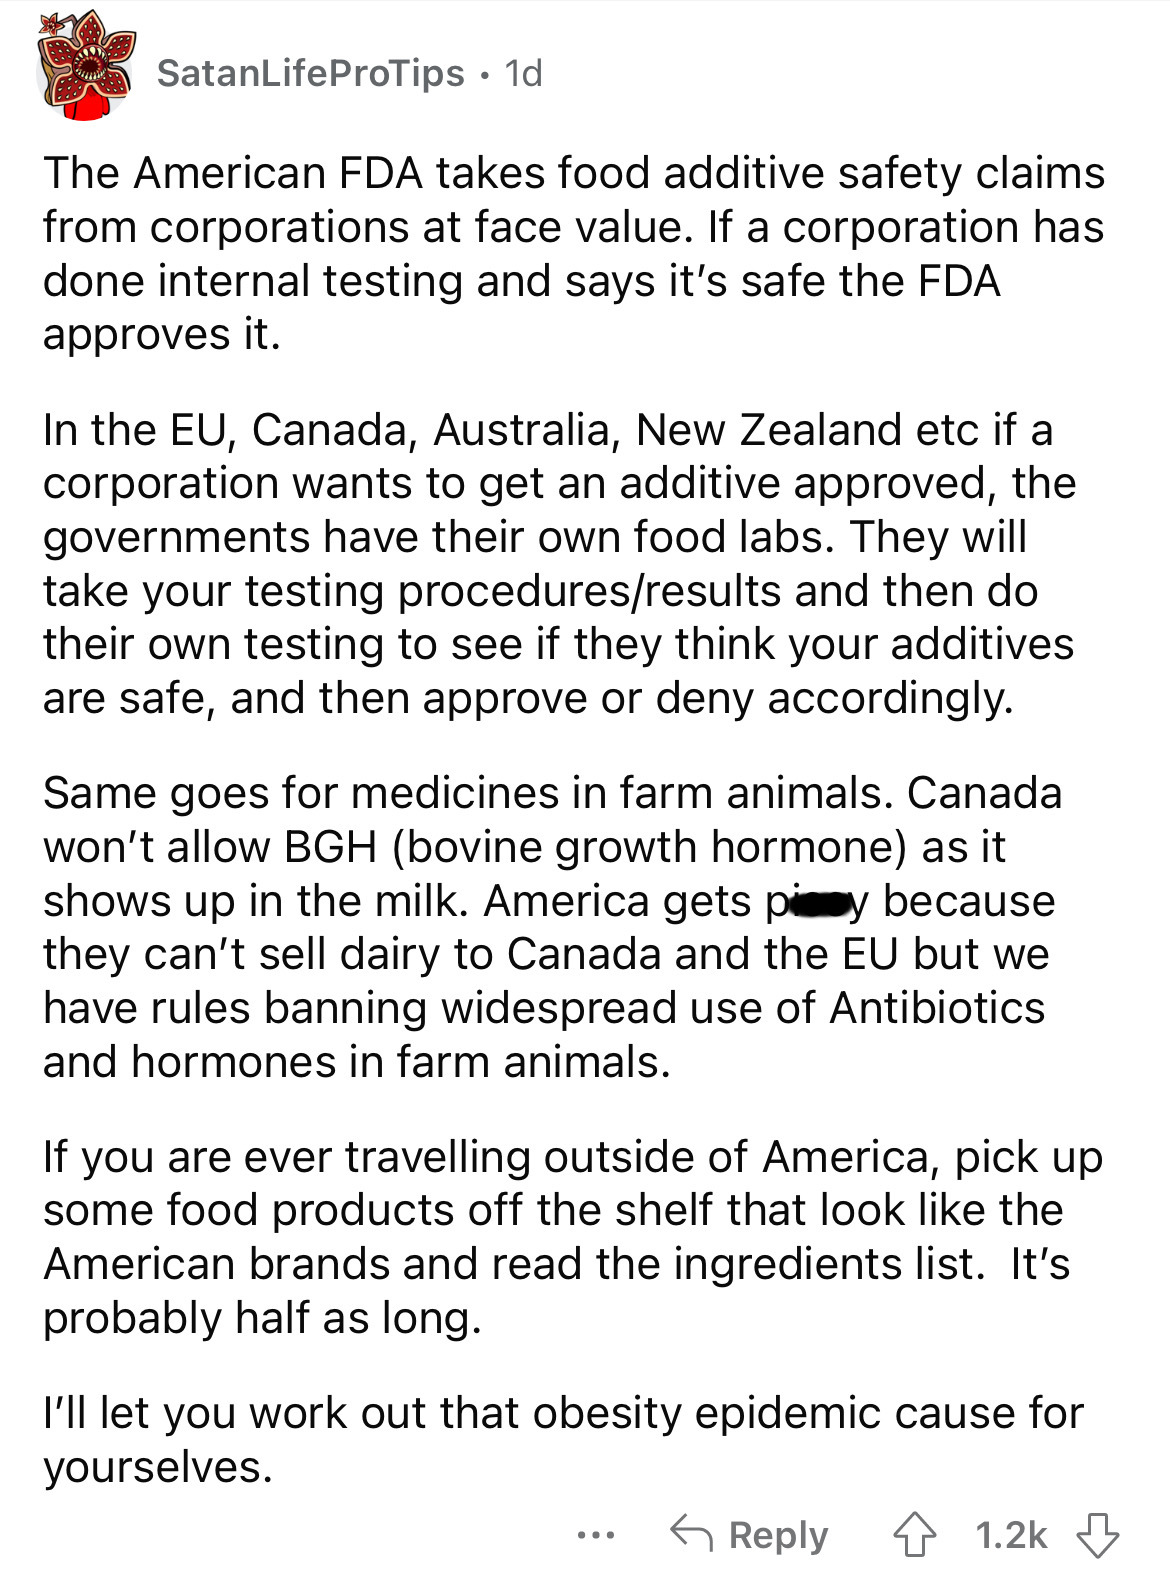 paper - SatanLifeProTips 1d The American Fda takes food additive safety claims from corporations at face value. If a corporation has done internal testing and says it's safe the Fda approves it. In the Eu, Canada, Australia, New Zealand etc if a corporati